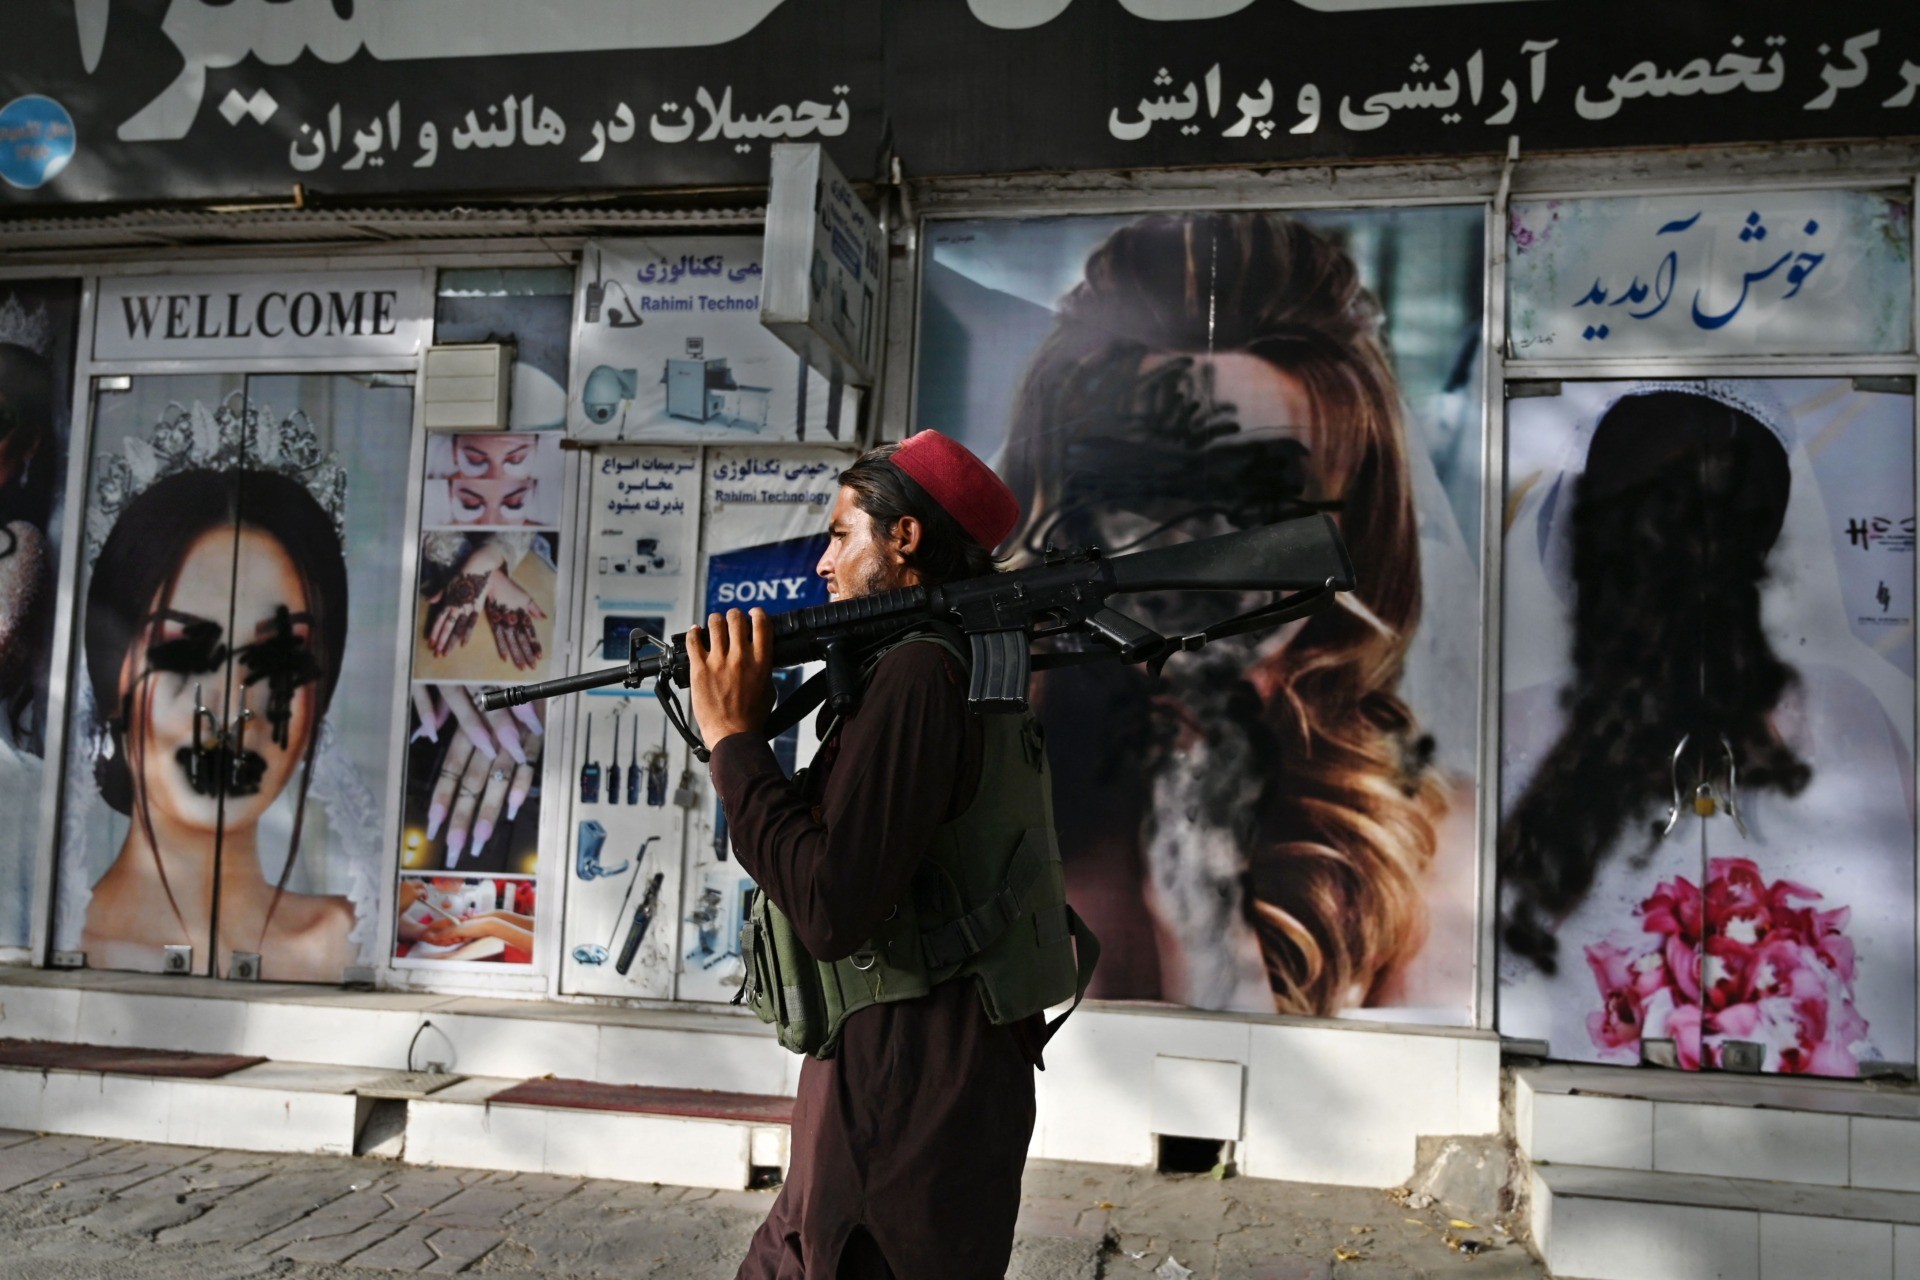 TOPSHOT - A Taliban fighter walks past a beauty salon with images of women defaced using spray paint in Shar-e-Naw in Kabul on August 18, 2021. (Photo by Wakil KOHSAR / AFP) (Photo by WAKIL KOHSAR/AFP via Getty Images)